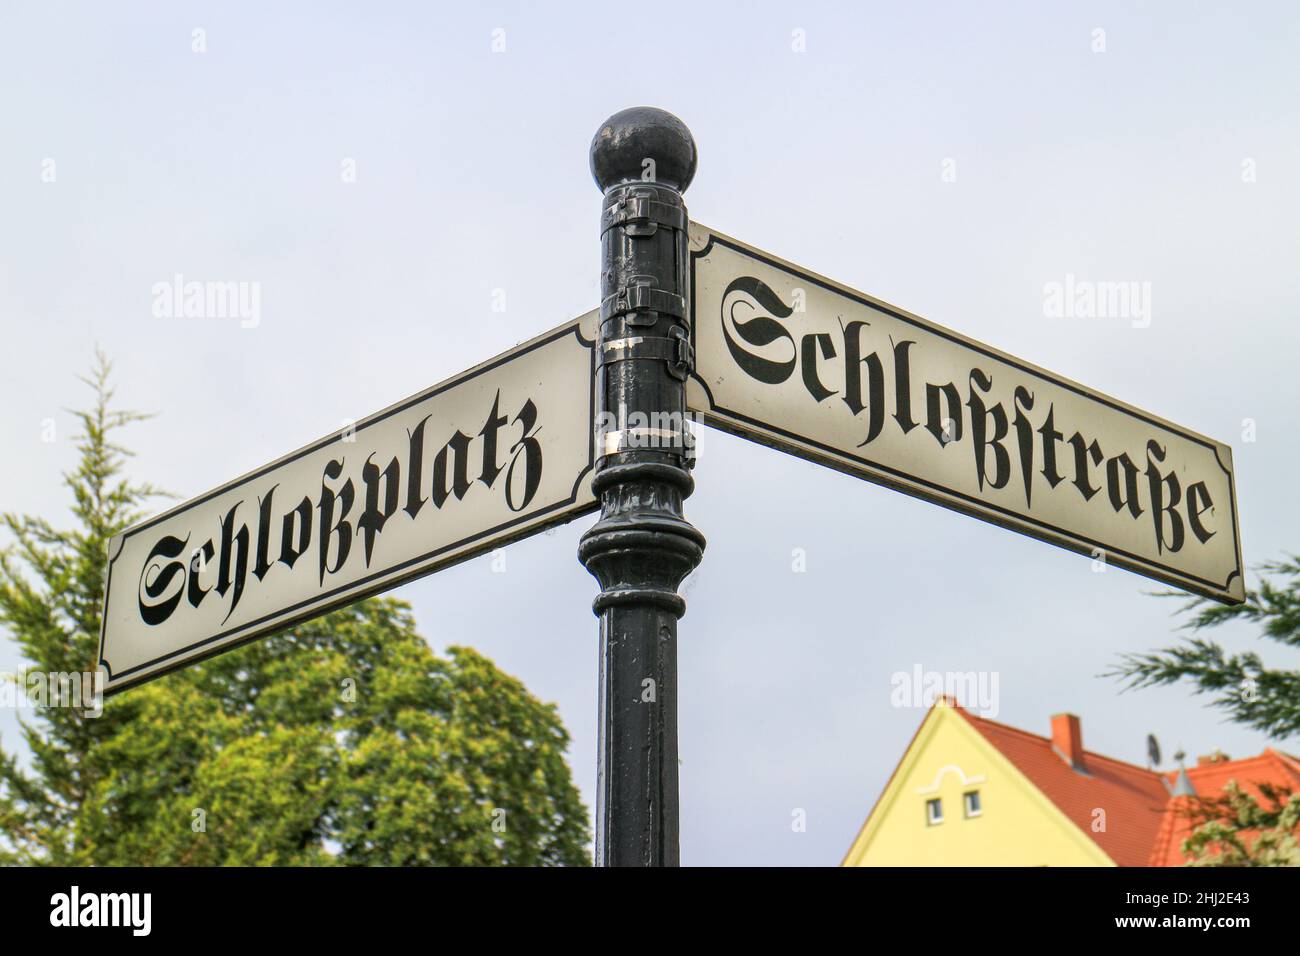 German antique street sign with the street names 'Schloßstraße' and 'Schloßplatz' which translates into 'Castle street' and 'Castle place' in English Stock Photo